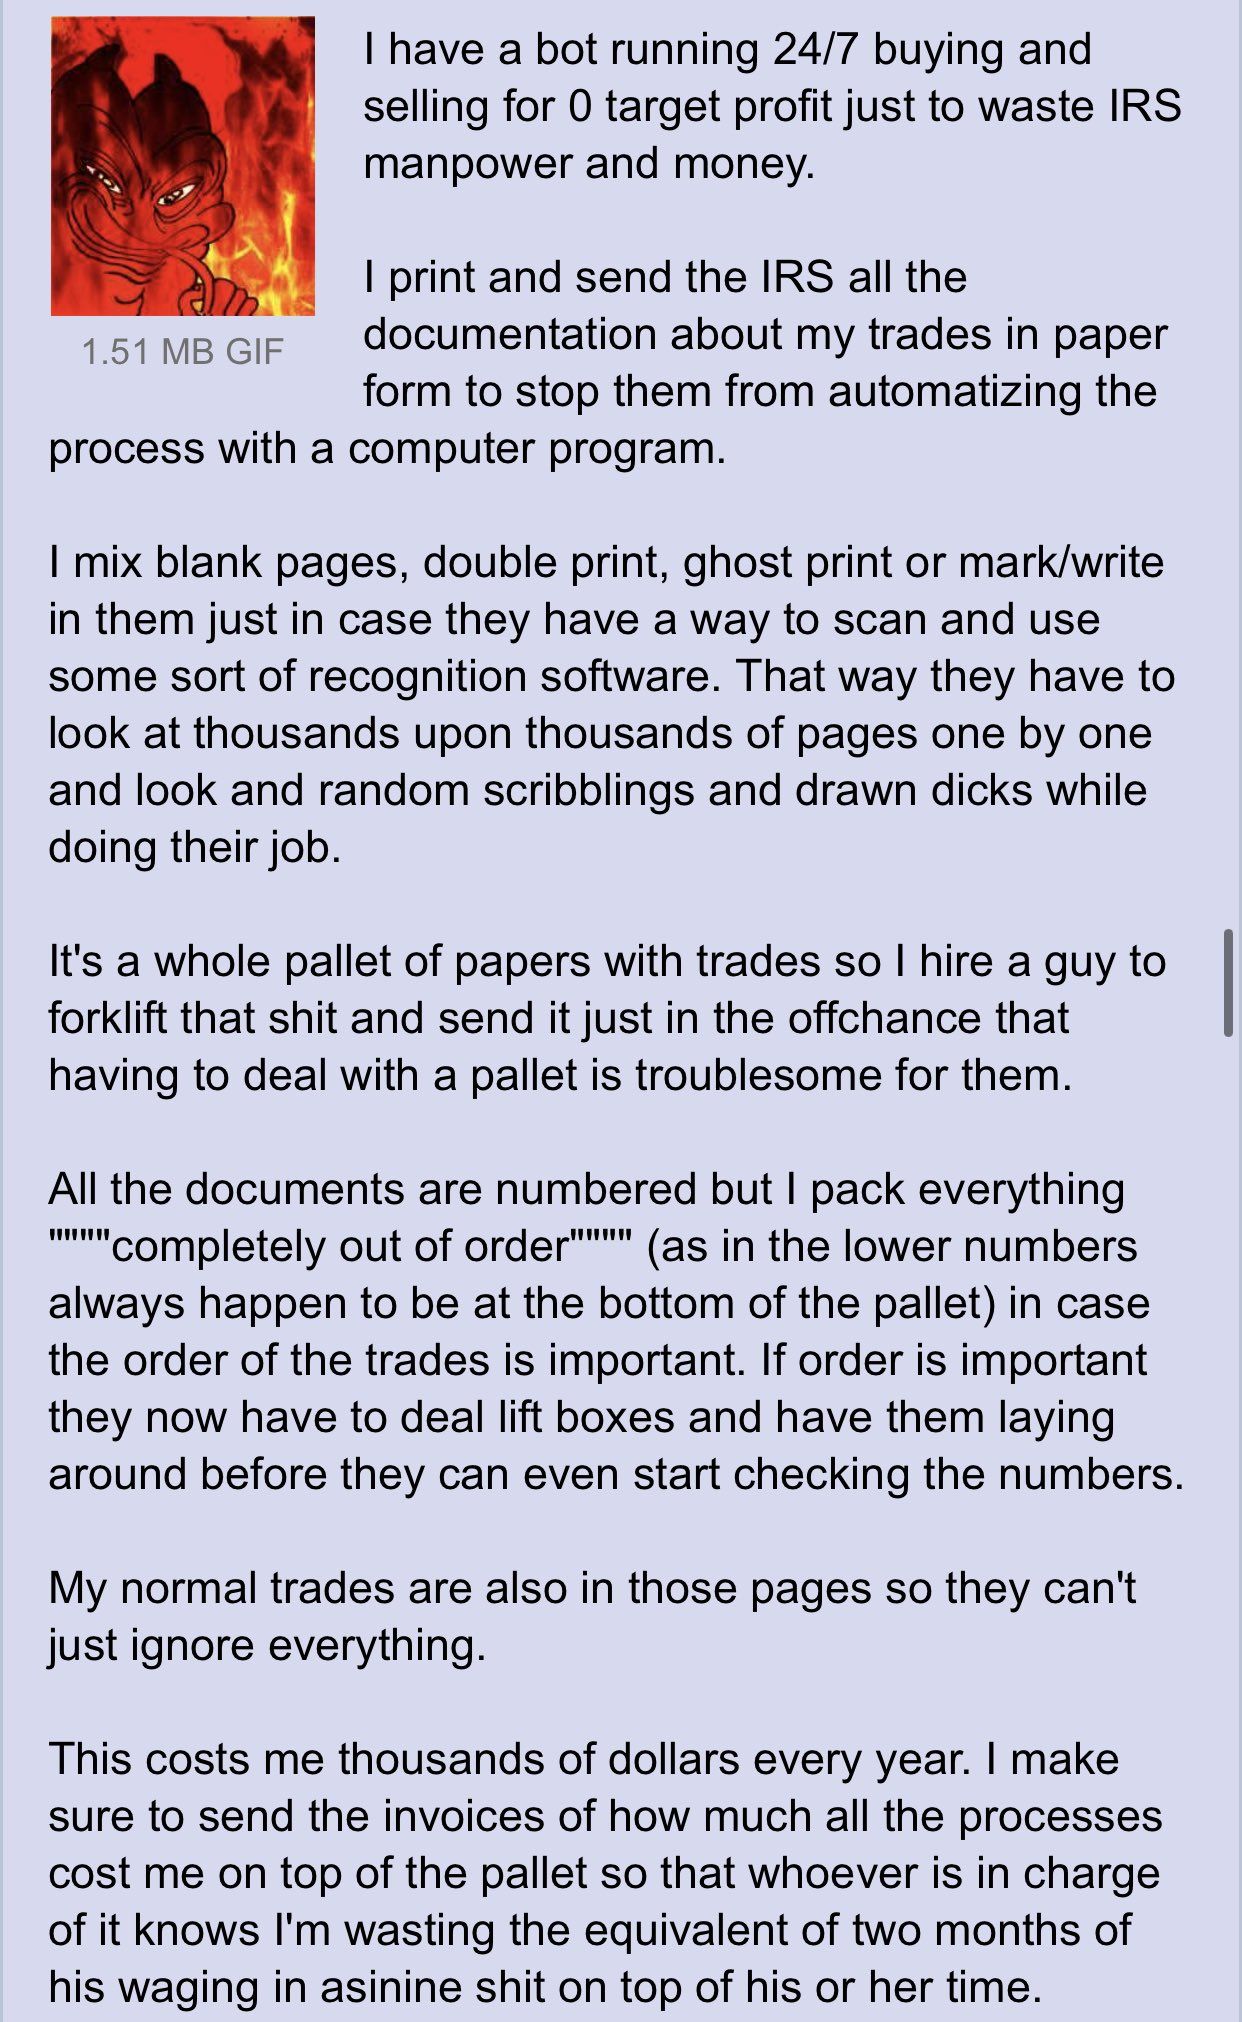 Anon trolls the tax collectors